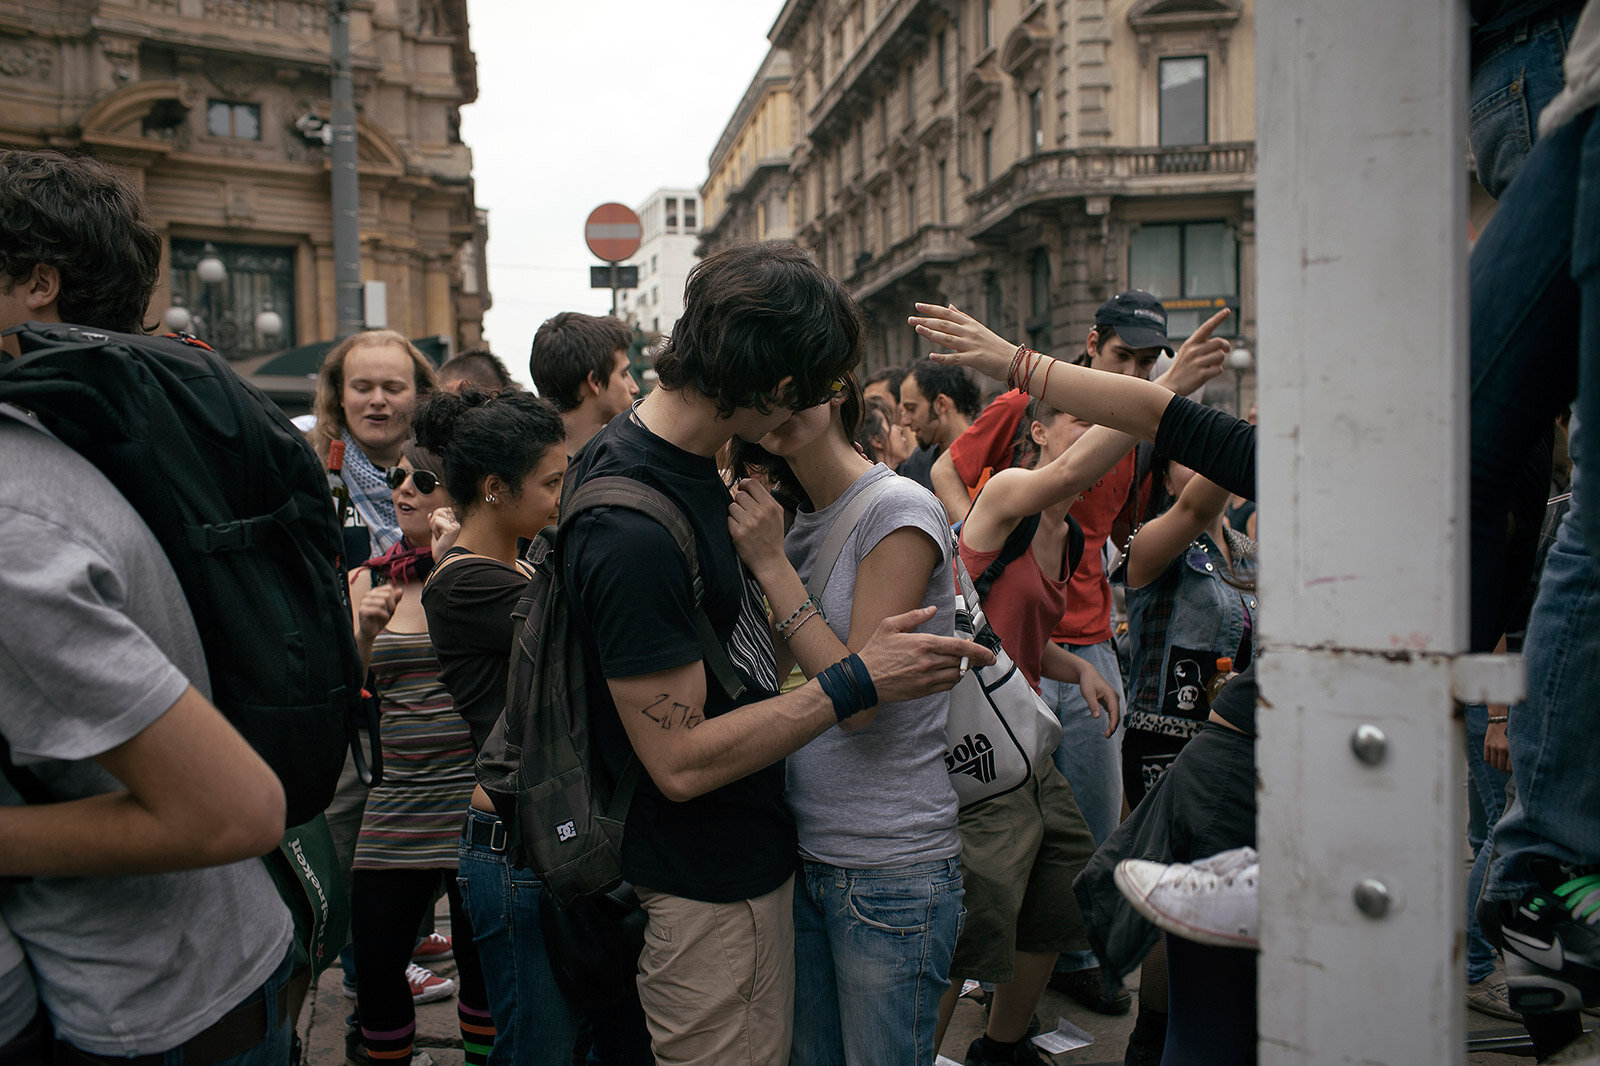  A couple kiss during a street parade on May 2009 in Milan, Italy. 